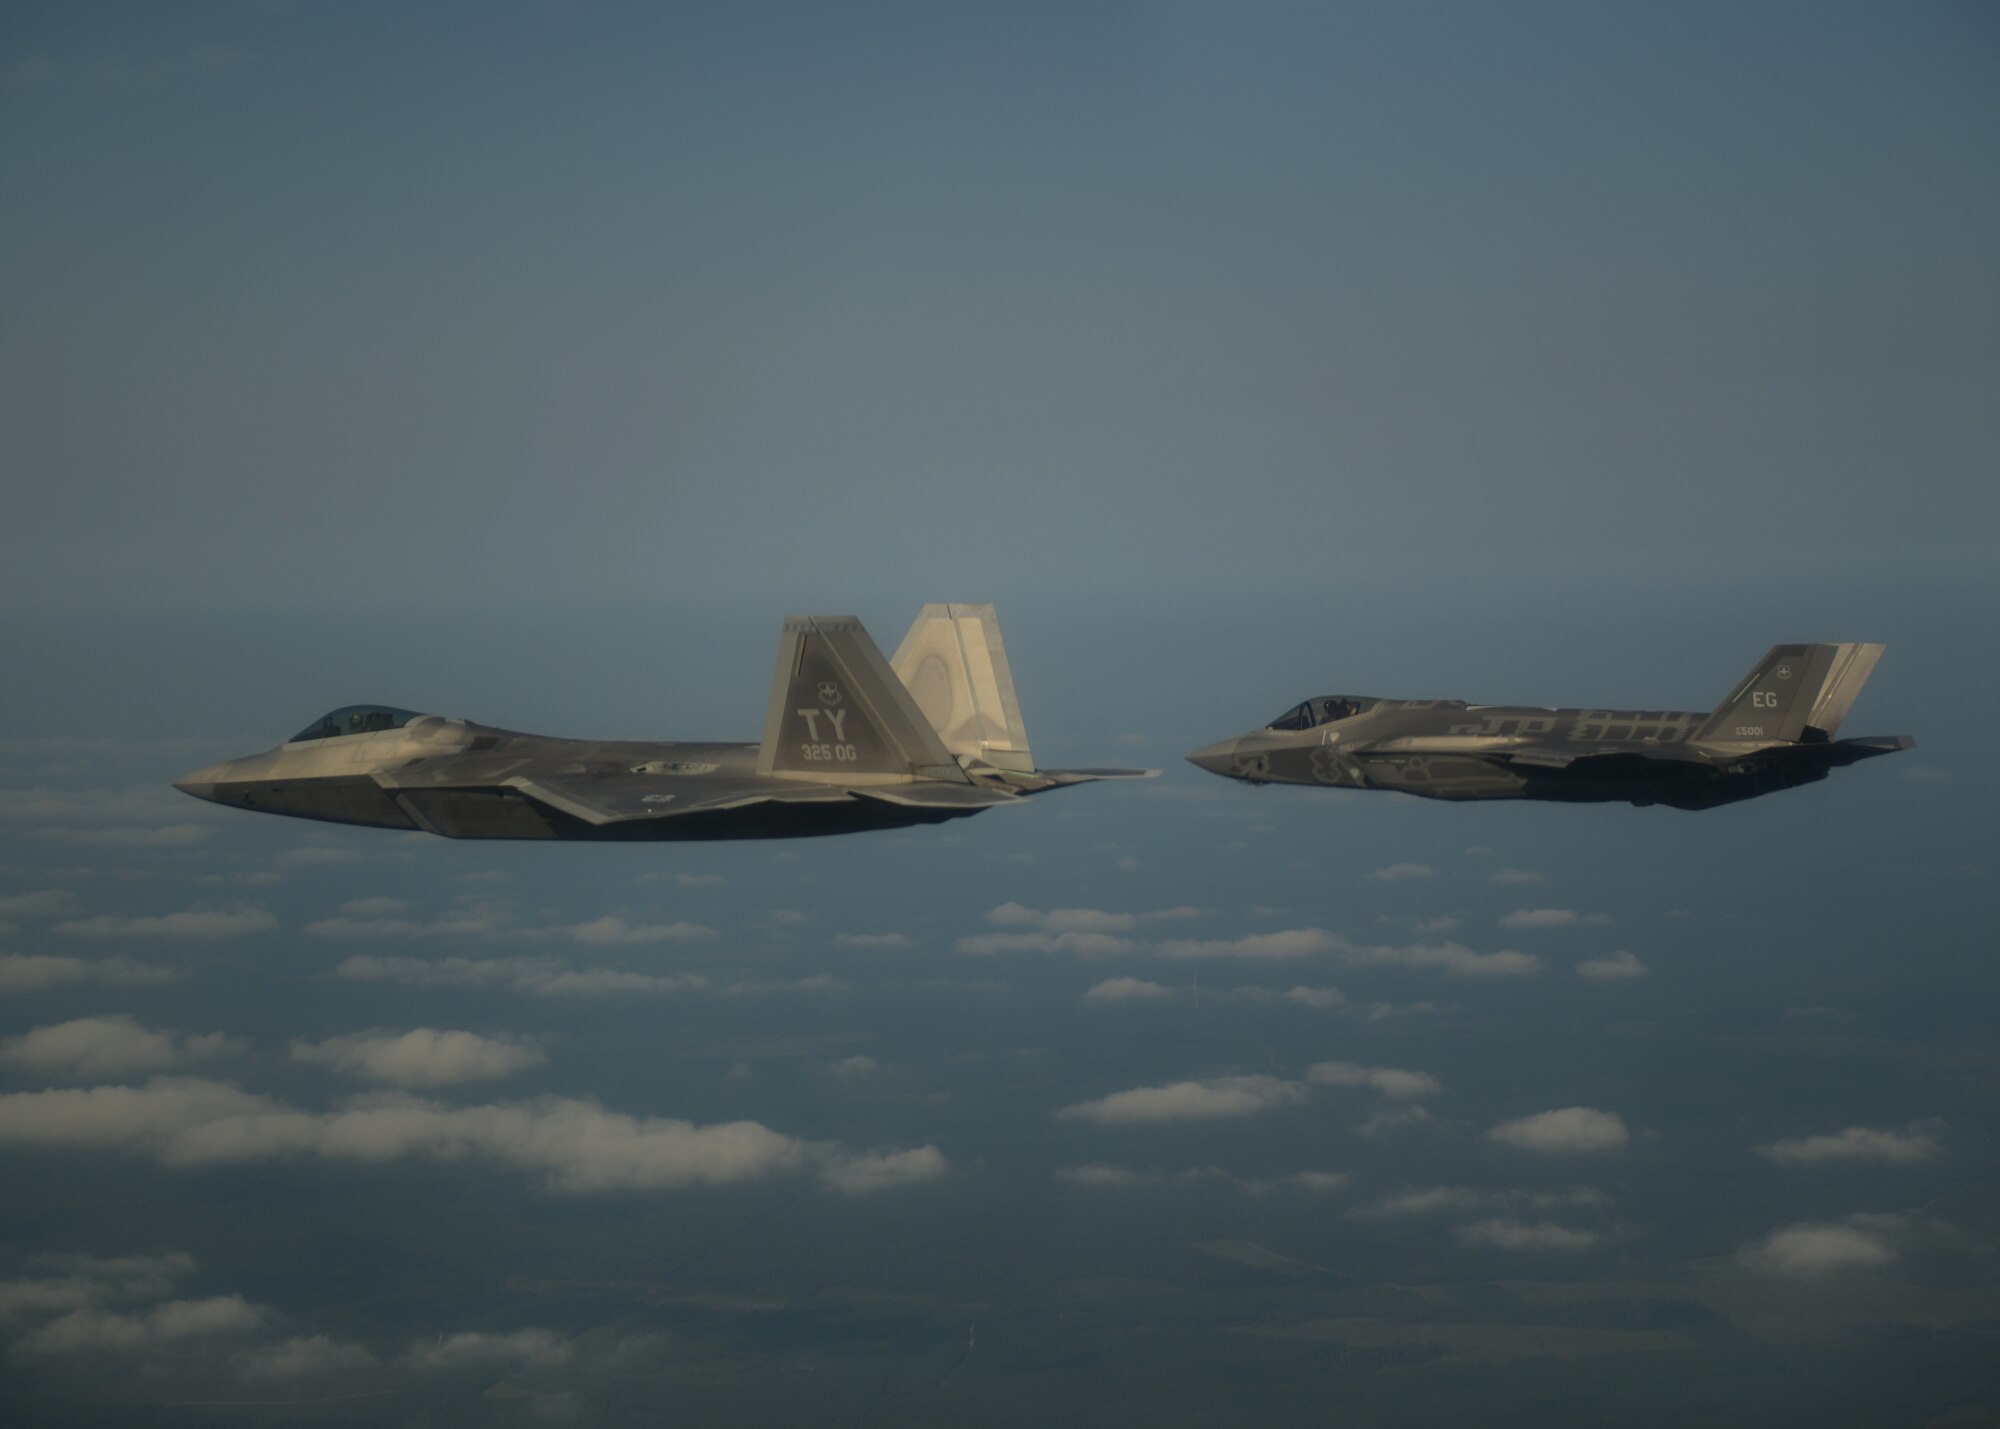 An F-22A Raptor from the 325th Fighter Wing at Tyndall Air Force Base, Fla., and an F-35A Lightning II joint strike fighter from the 33rd Fighter Wing at Eglin Air Force Base, Fla., soar over the Eglin range Sept. 19.  This was the first time the two fifth generation fighters have flown together for the Air Force.  (U.S. Air Force photo/Master Sgt. Jeremy T. Lock)